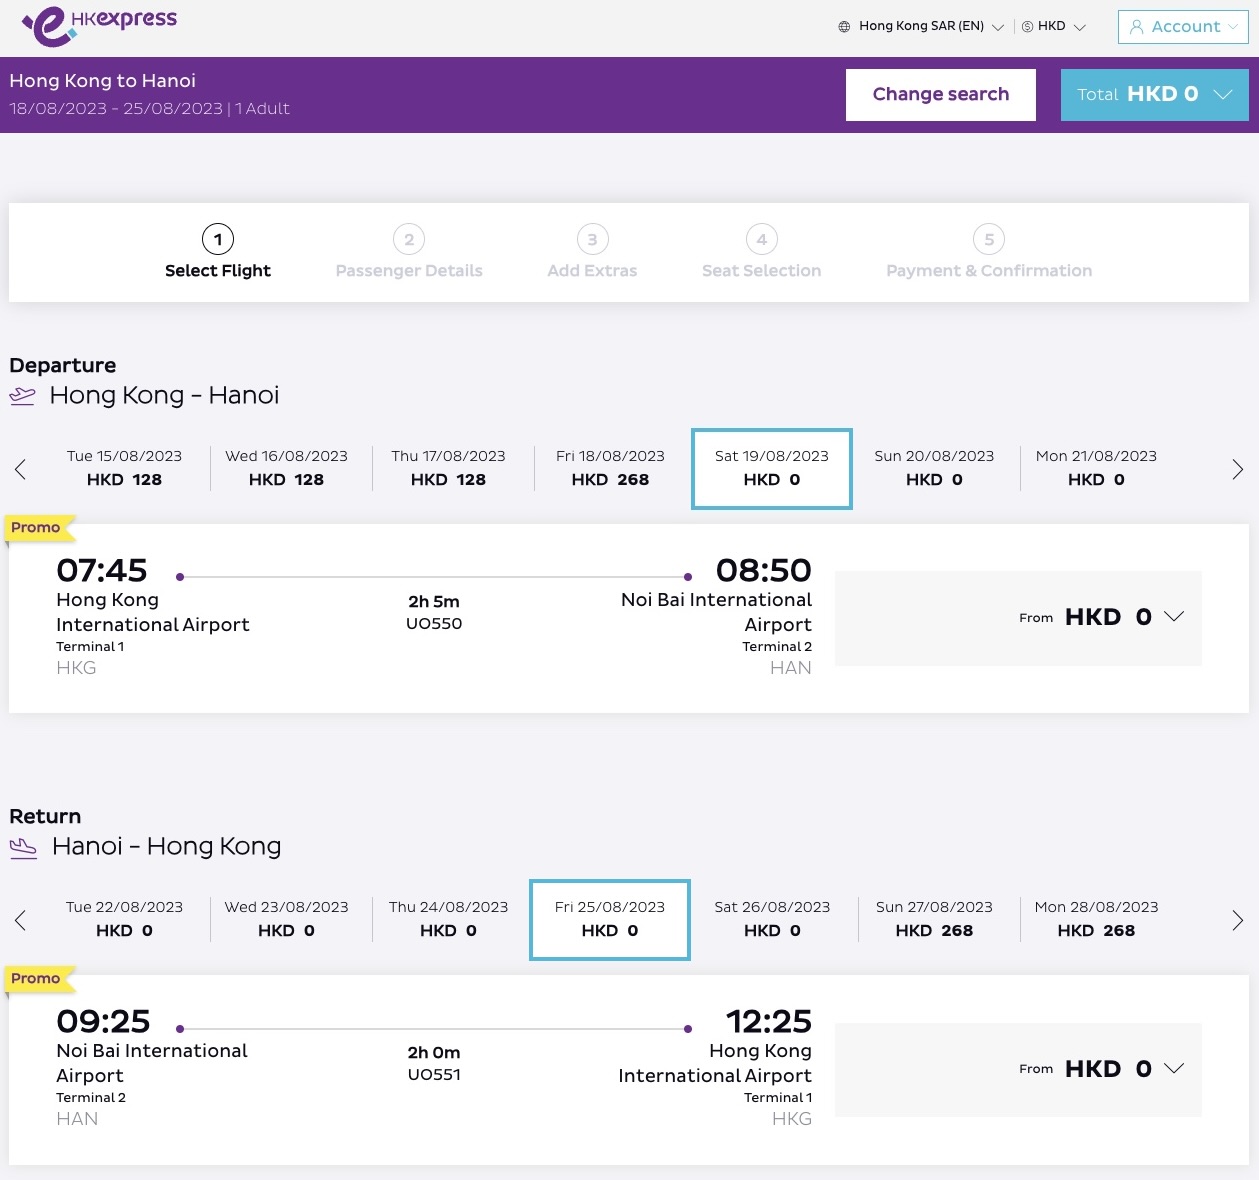 A screenshot from the HK Express website showing return fares on flights from August 18-December 12, 2023 as low as HK$0.